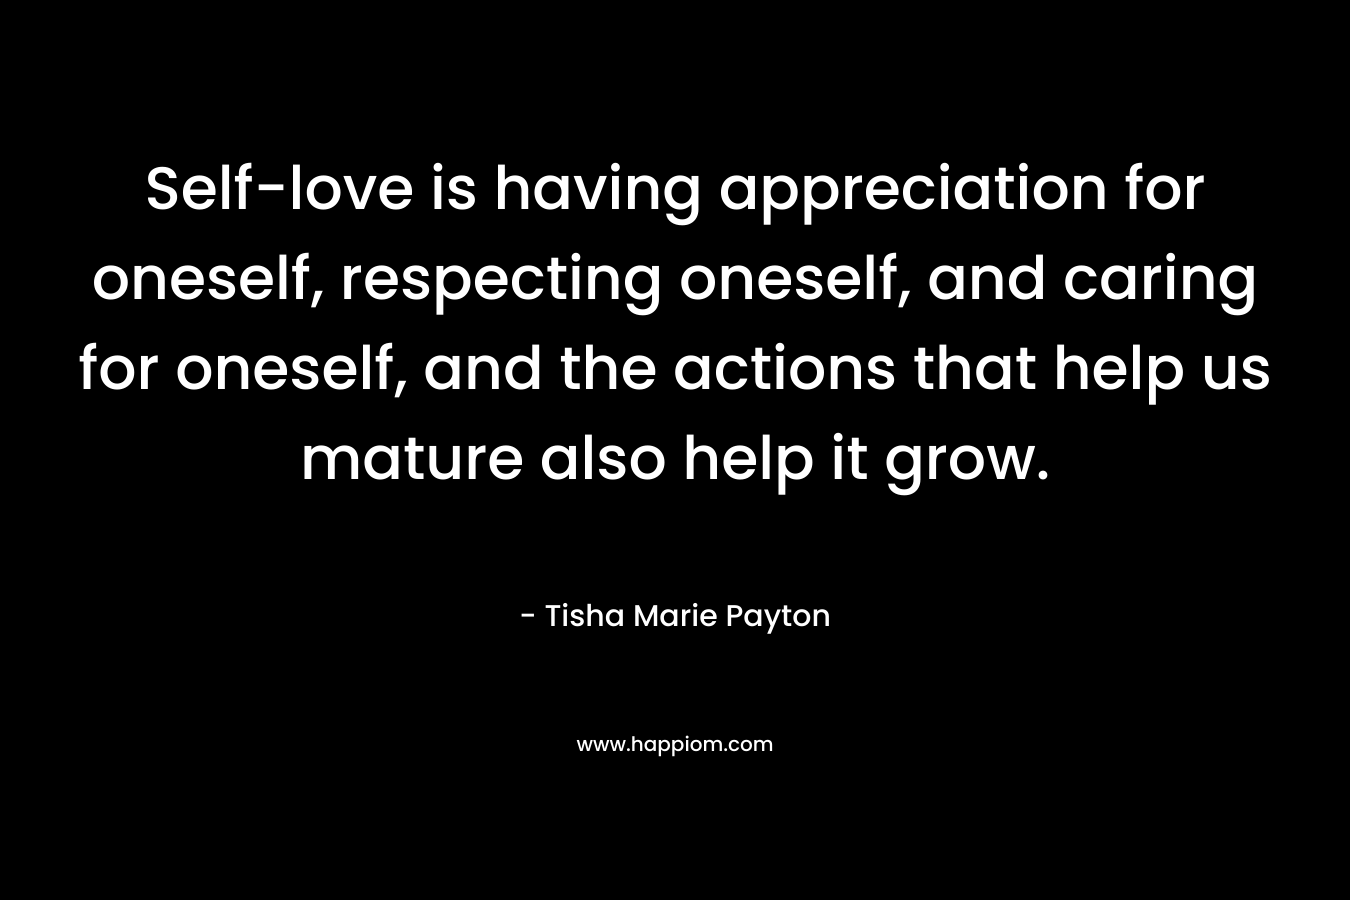 Self-love is having appreciation for oneself, respecting oneself, and caring for oneself, and the actions that help us mature also help it grow.